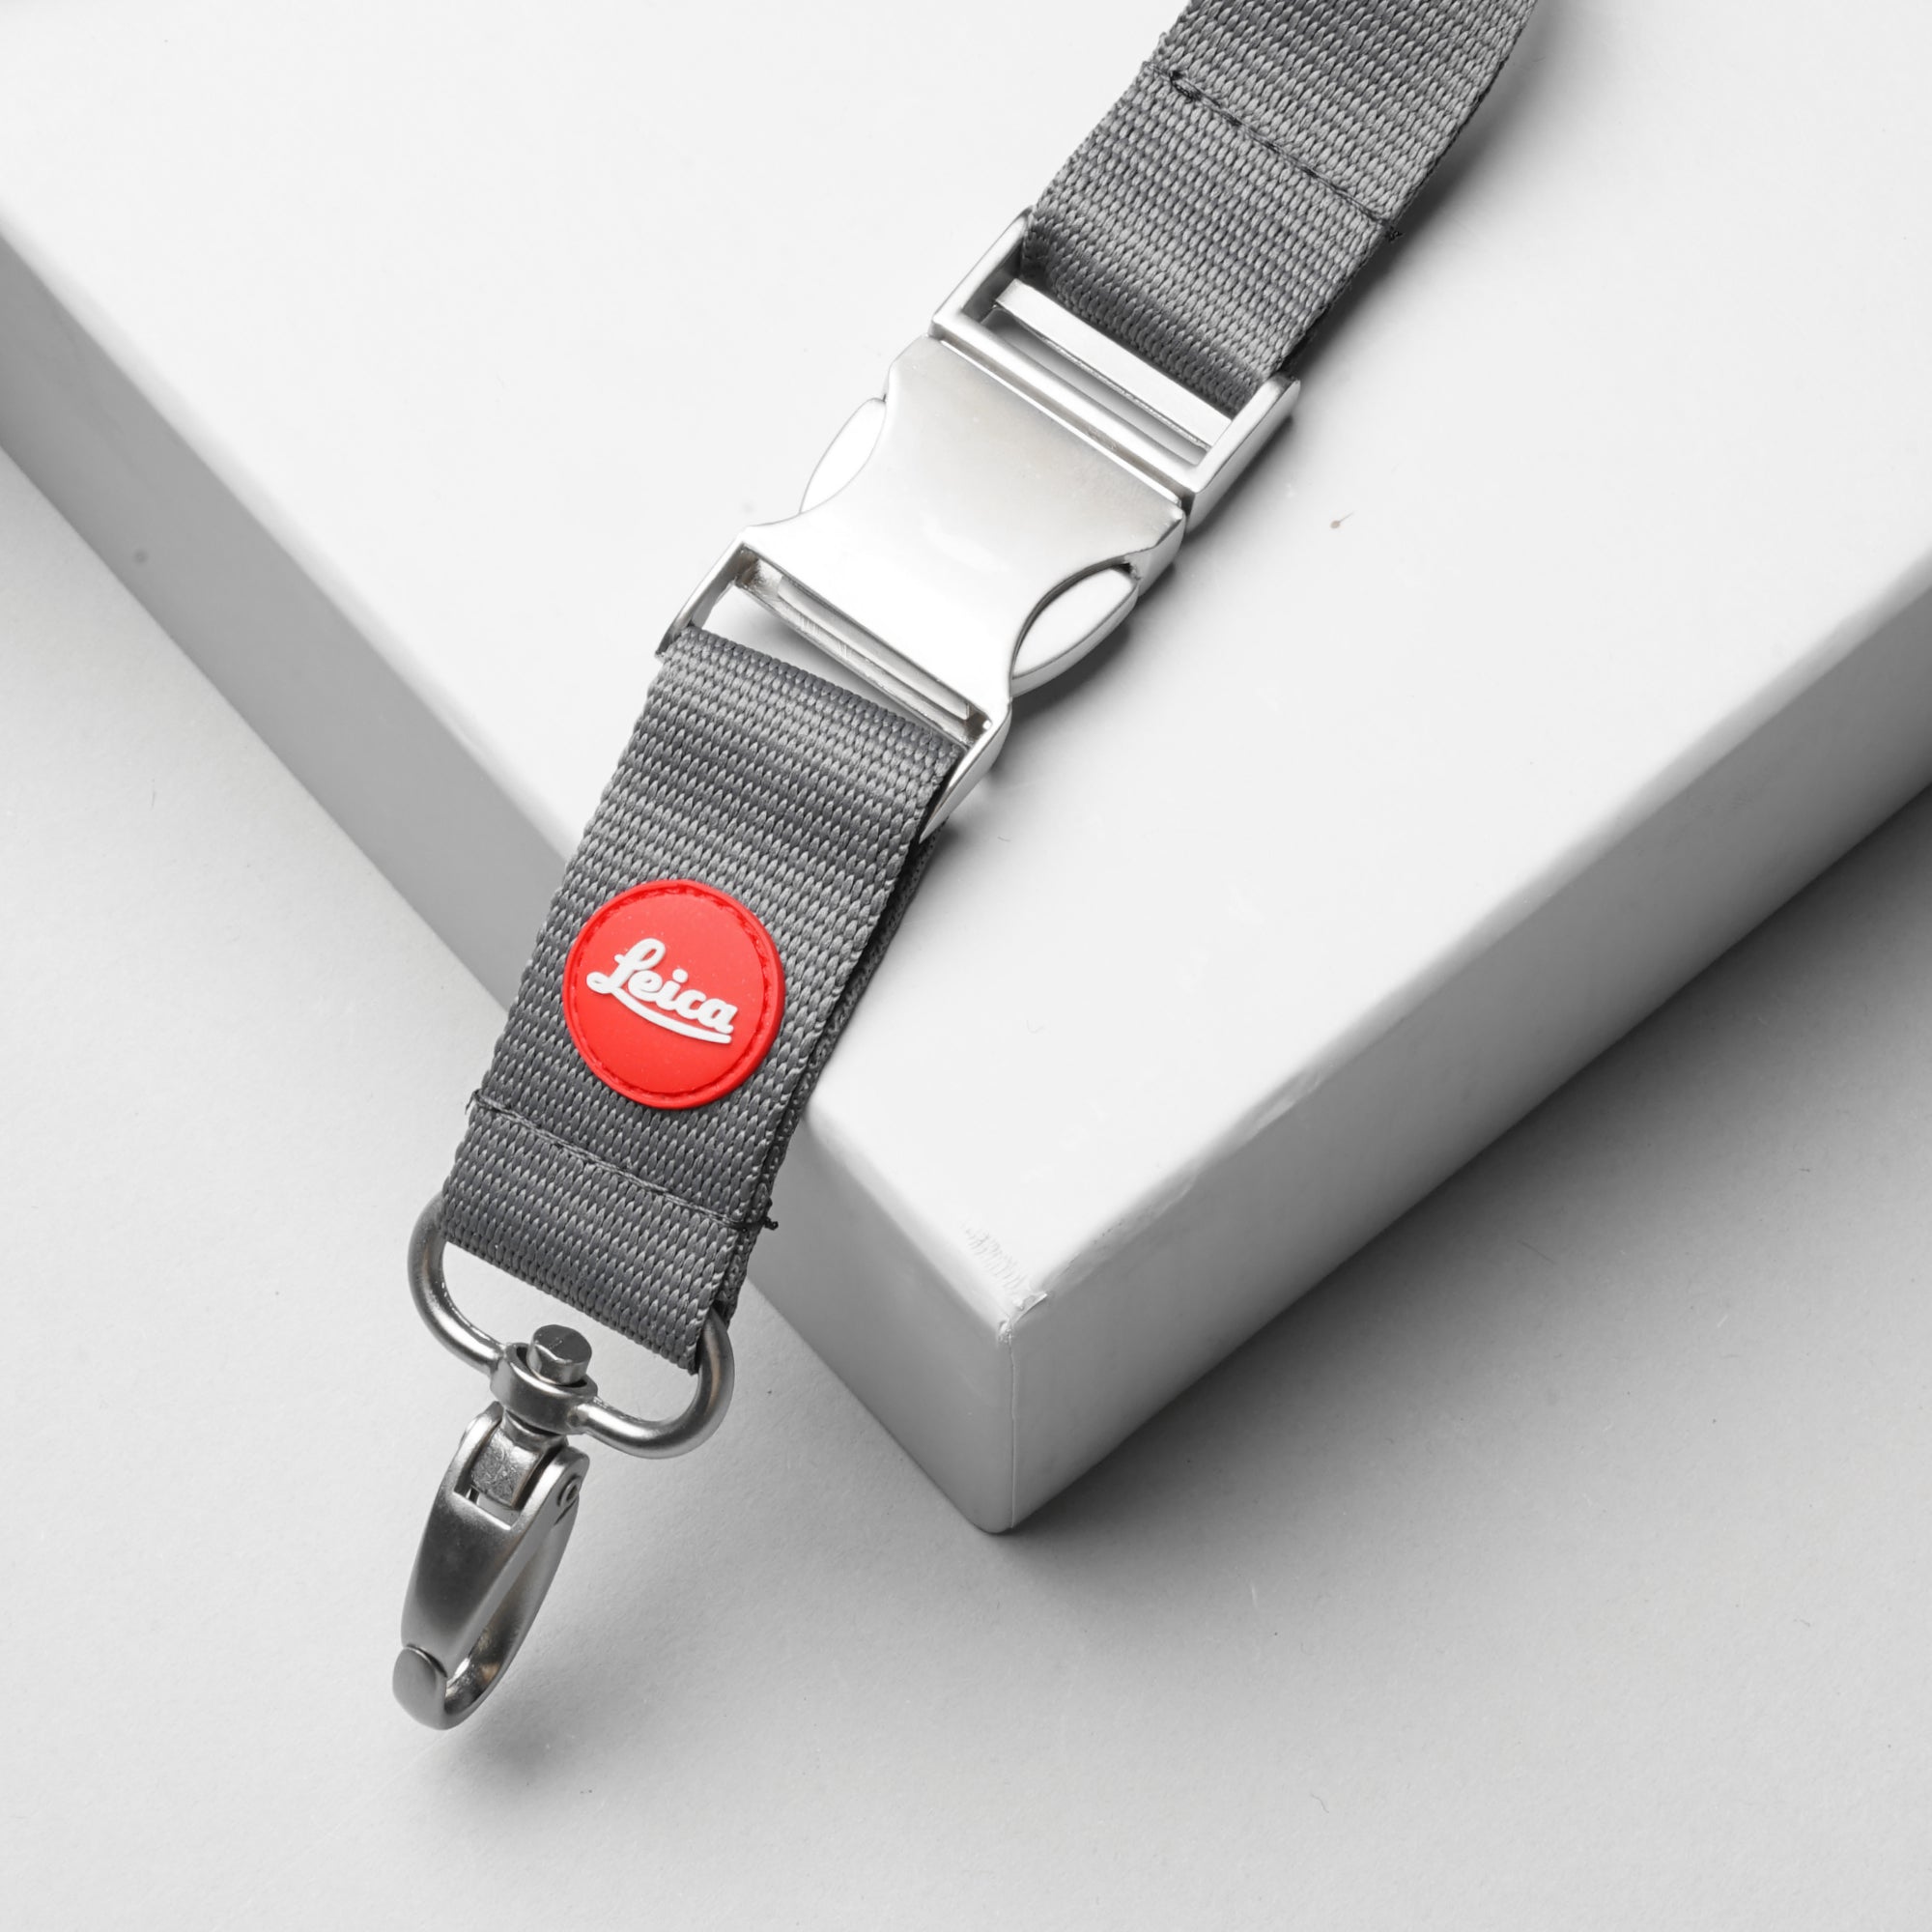 Buy Leica Keychain now at Analogue Amsterdam